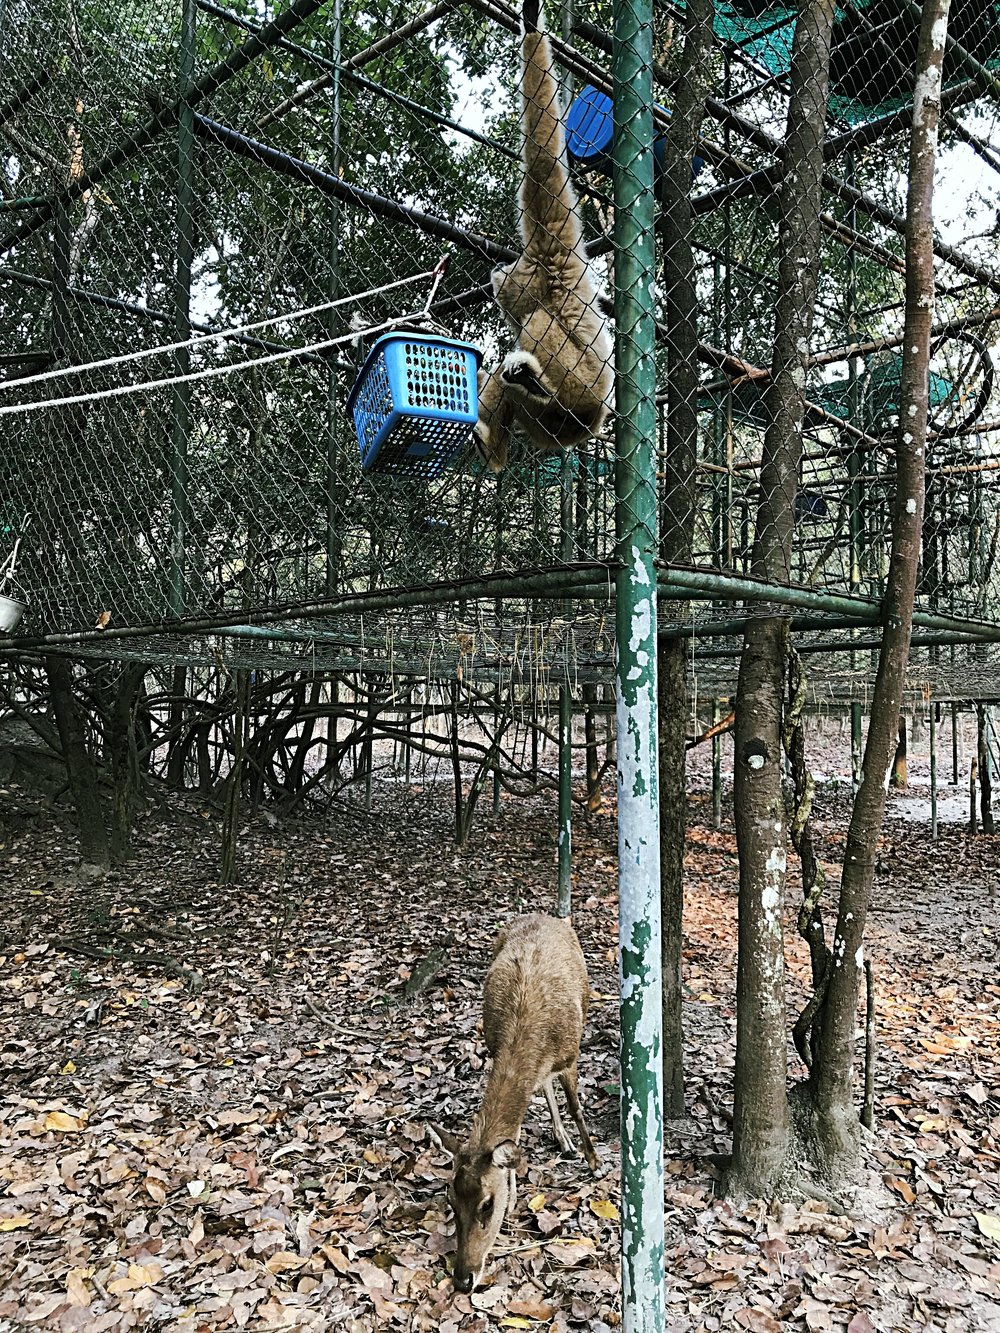 Deer catching the food that the gibbon dropped